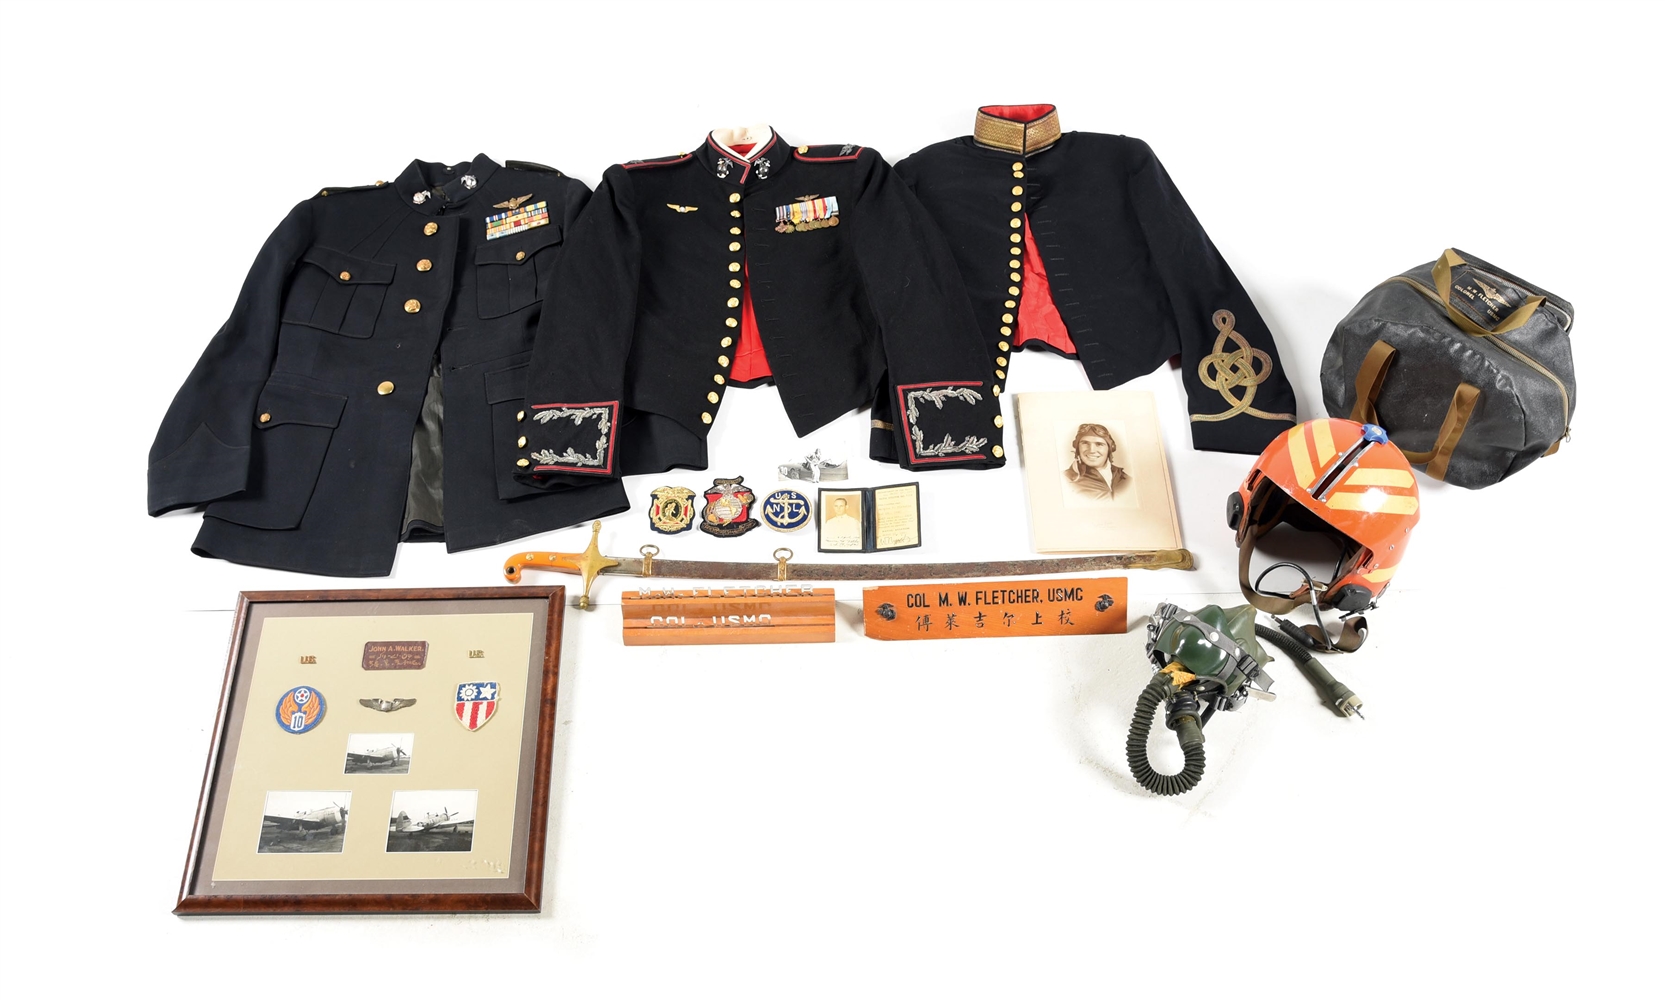 SIZEABLE AND IMPRESSIVE USMC UNIFORM, HELMET, INSIGNIA, SWORD, PHOTO, AND PAPER GROUPING OF COL. MAURICE W. FLETCHER.